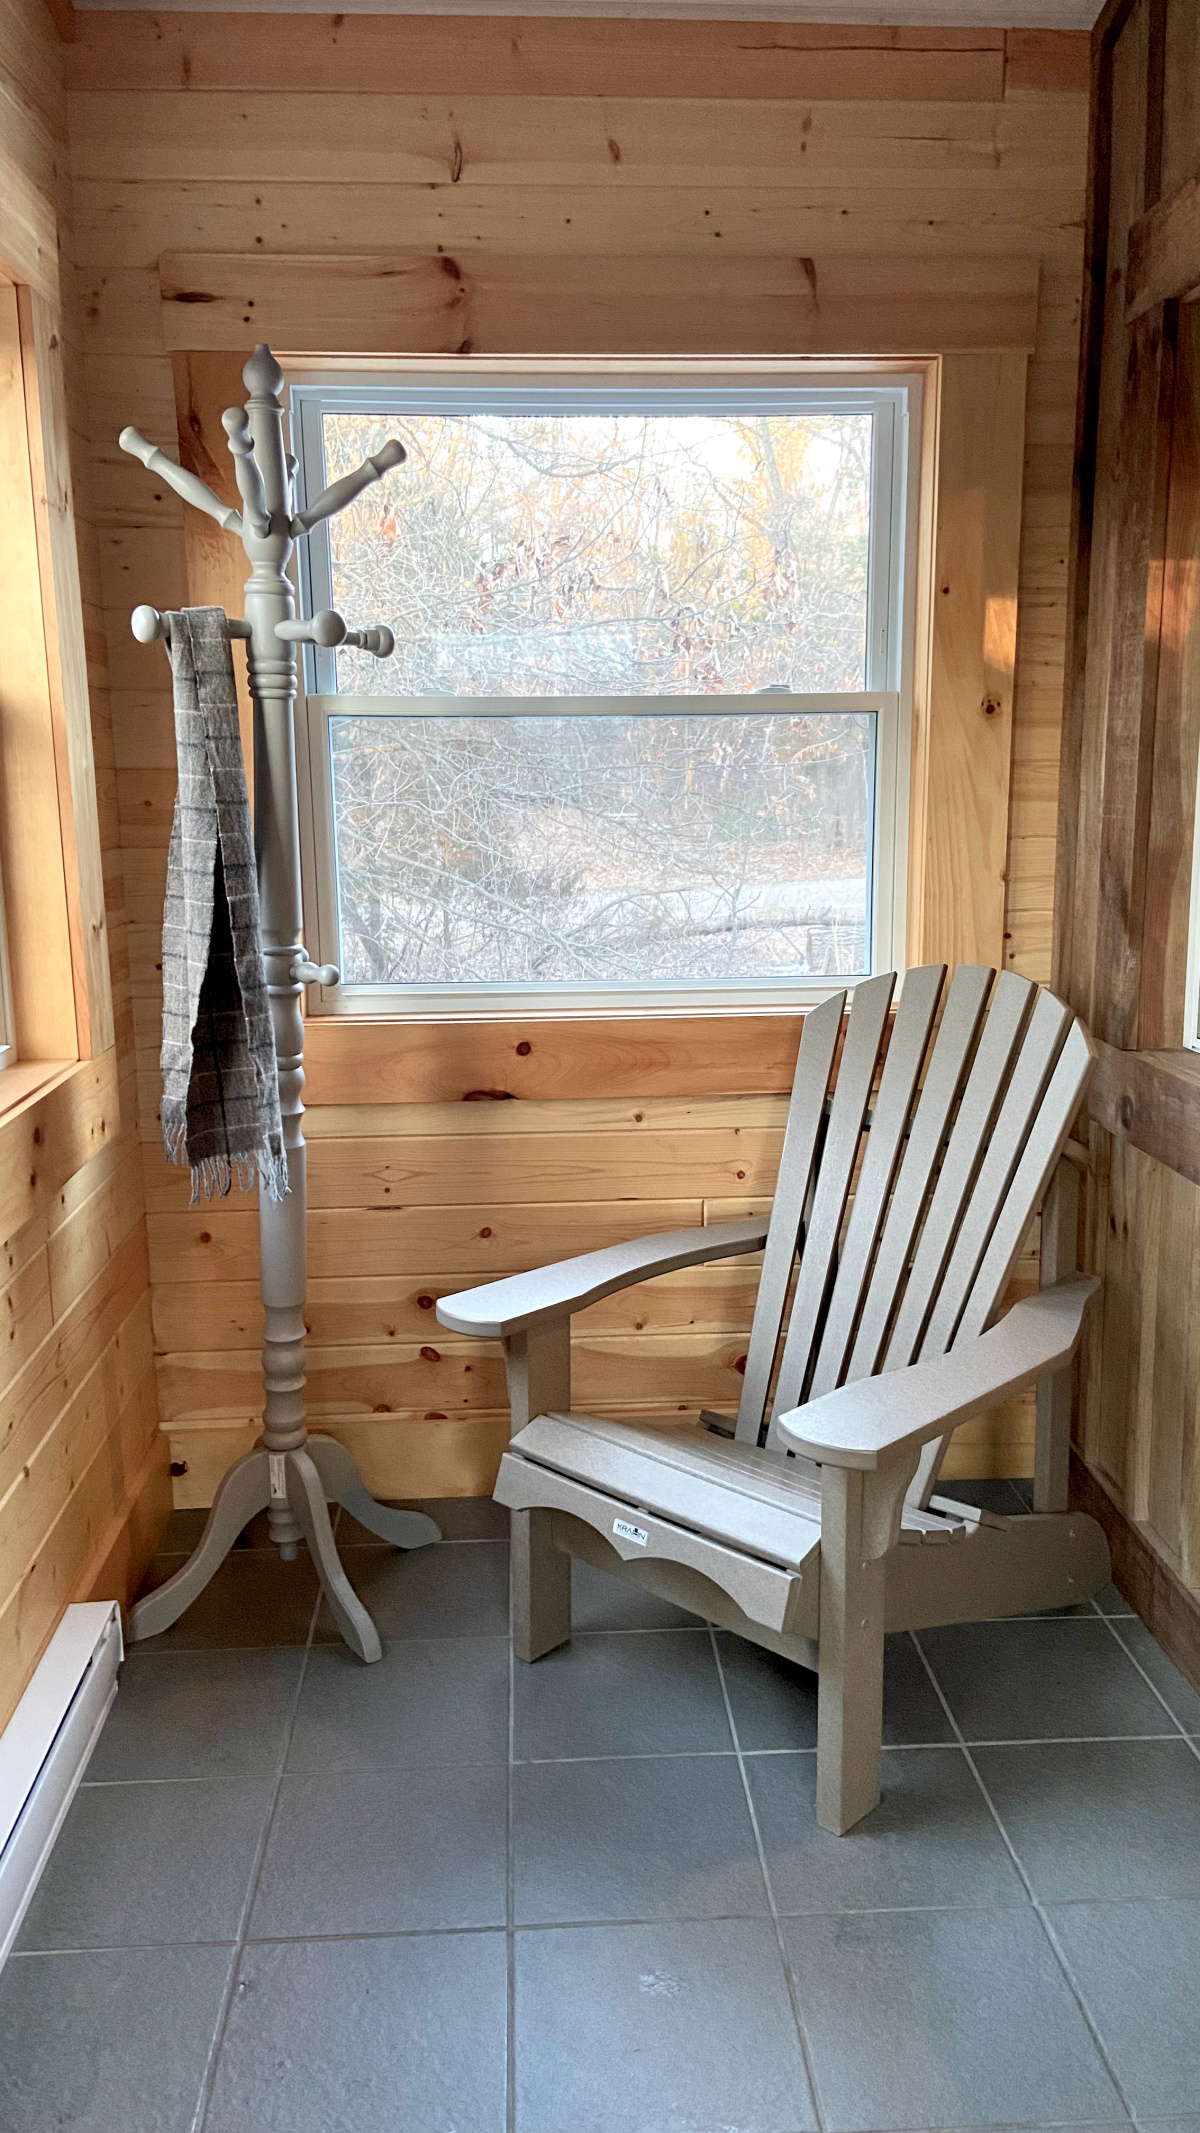 A coat rack and Adirondack chair in the cute cabin mudroom.